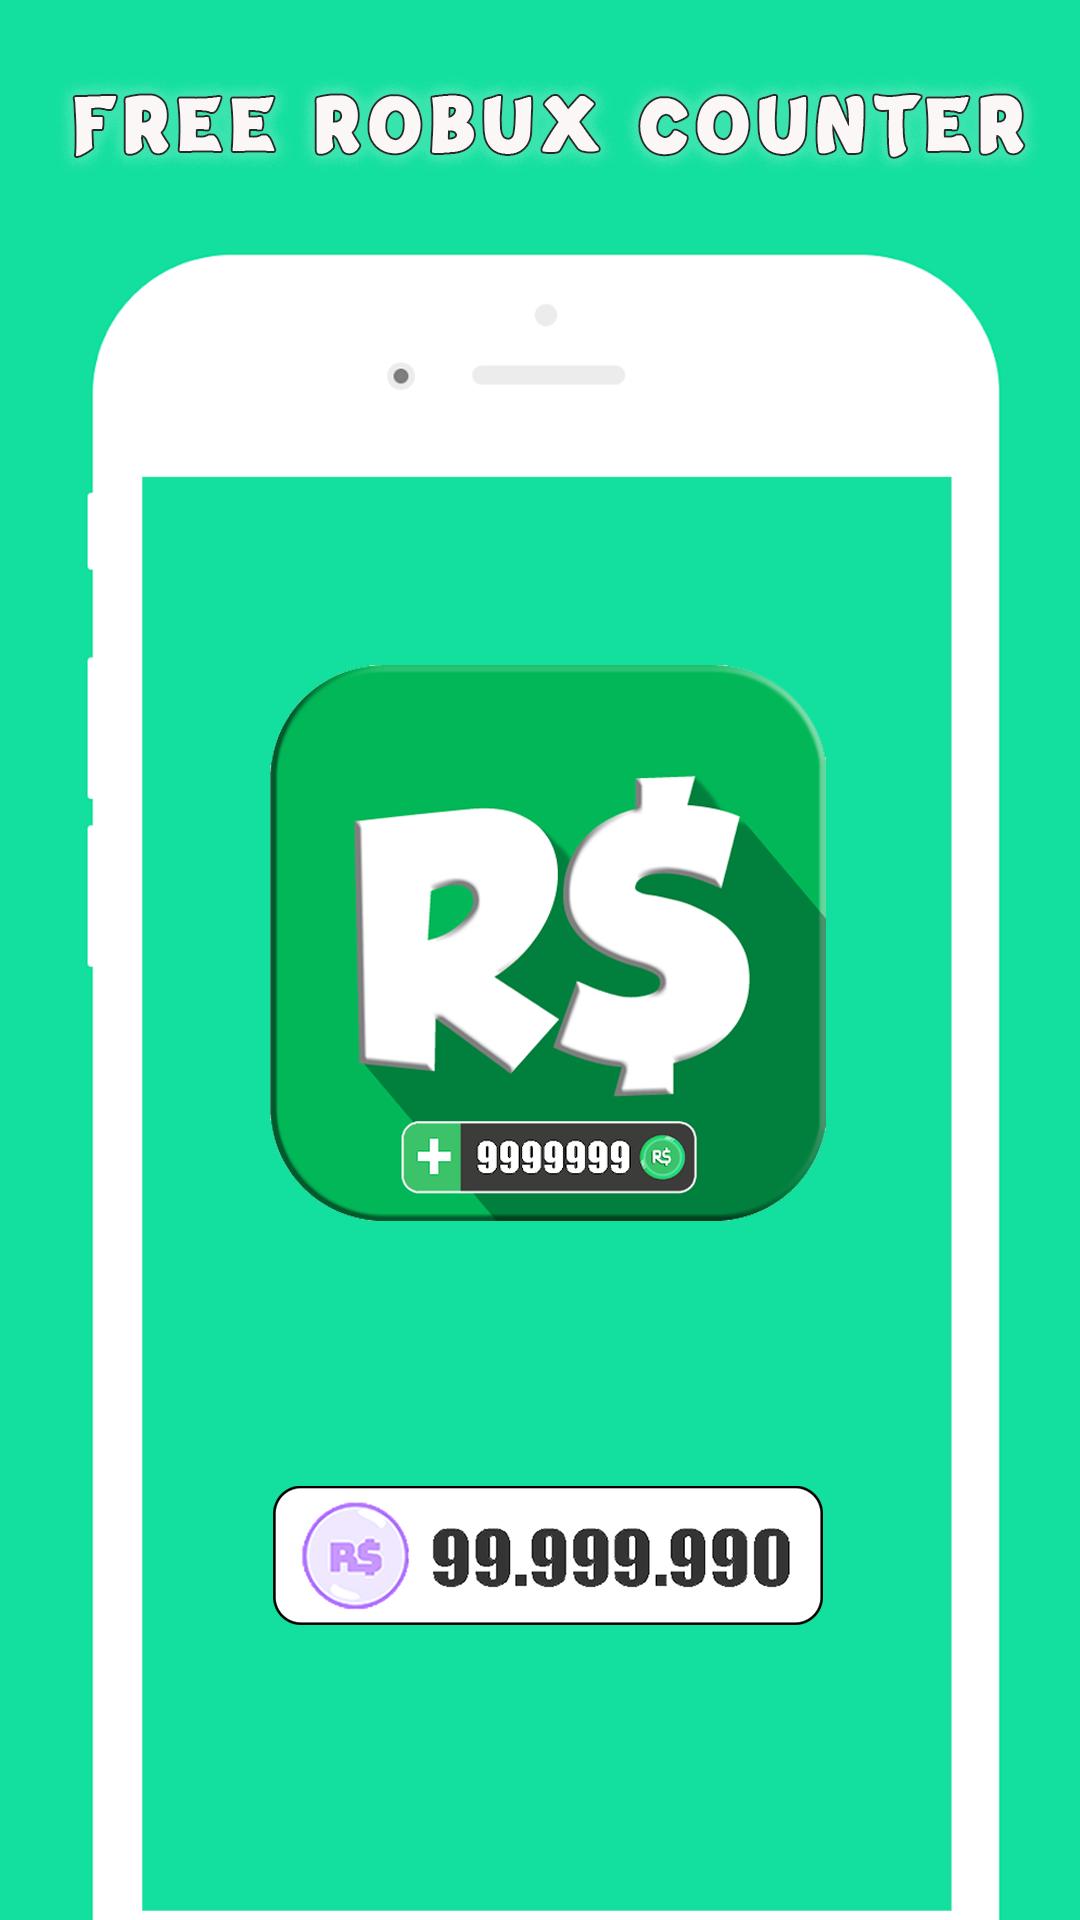 Free Robux For Android Apk Download - how much money is 999 999 999 robux